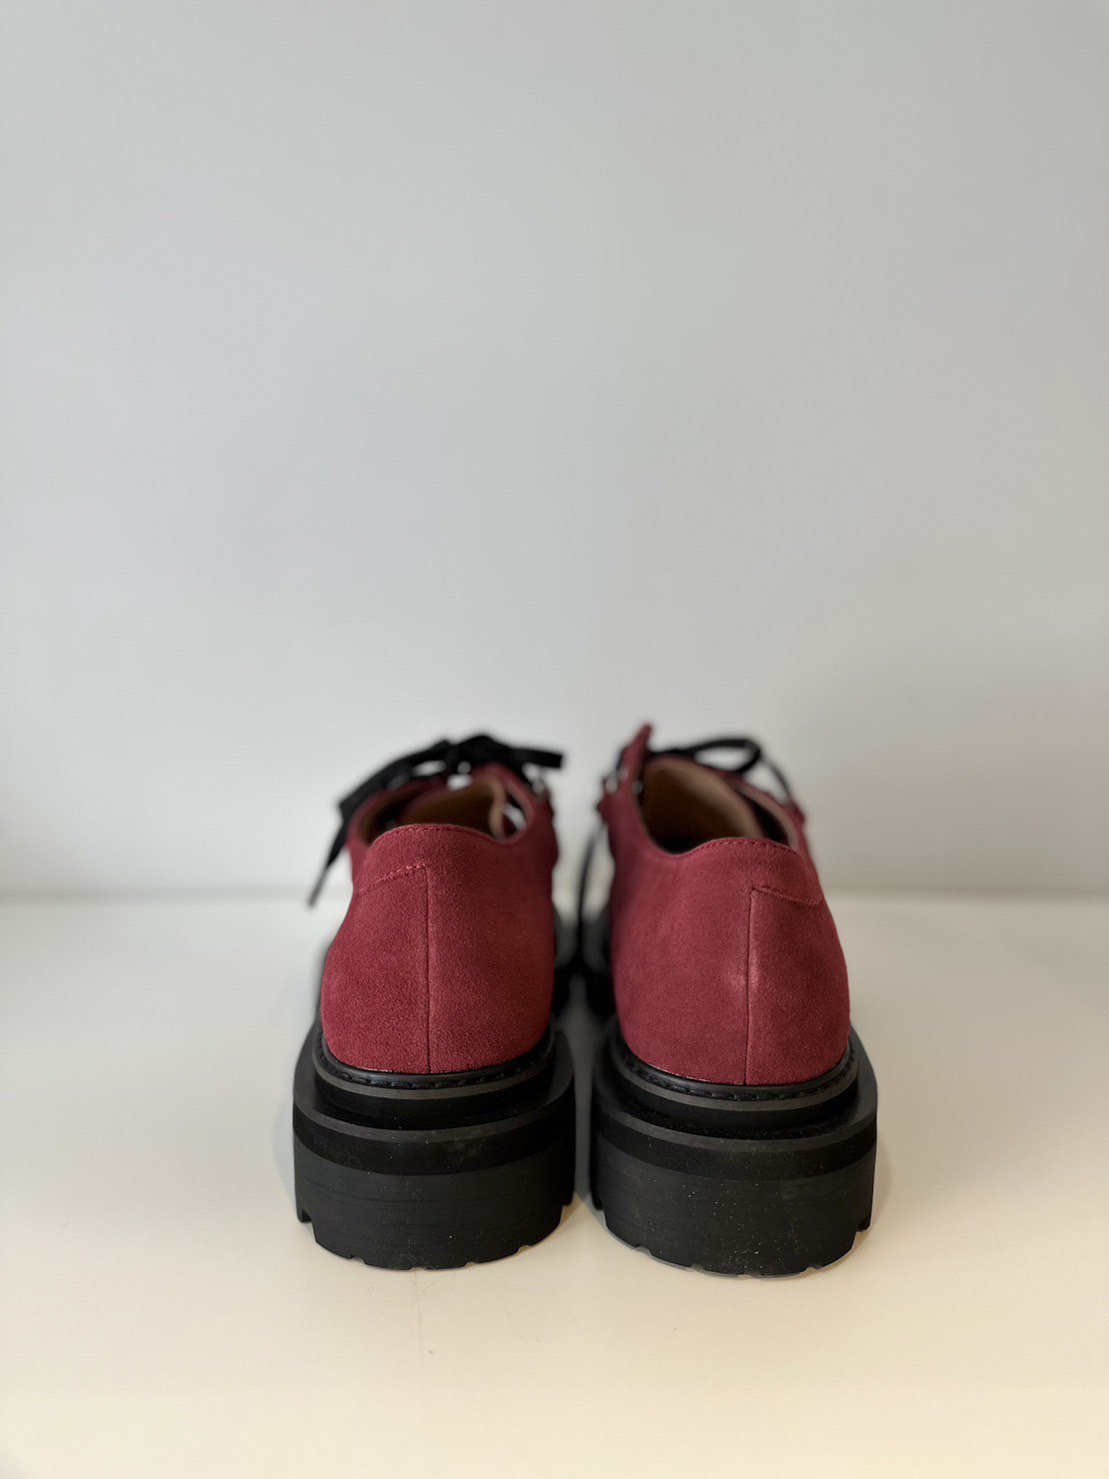 DAIRIKU<br />Suede Derby Shoes / Burgundy<img class='new_mark_img2' src='https://img.shop-pro.jp/img/new/icons14.gif' style='border:none;display:inline;margin:0px;padding:0px;width:auto;' />